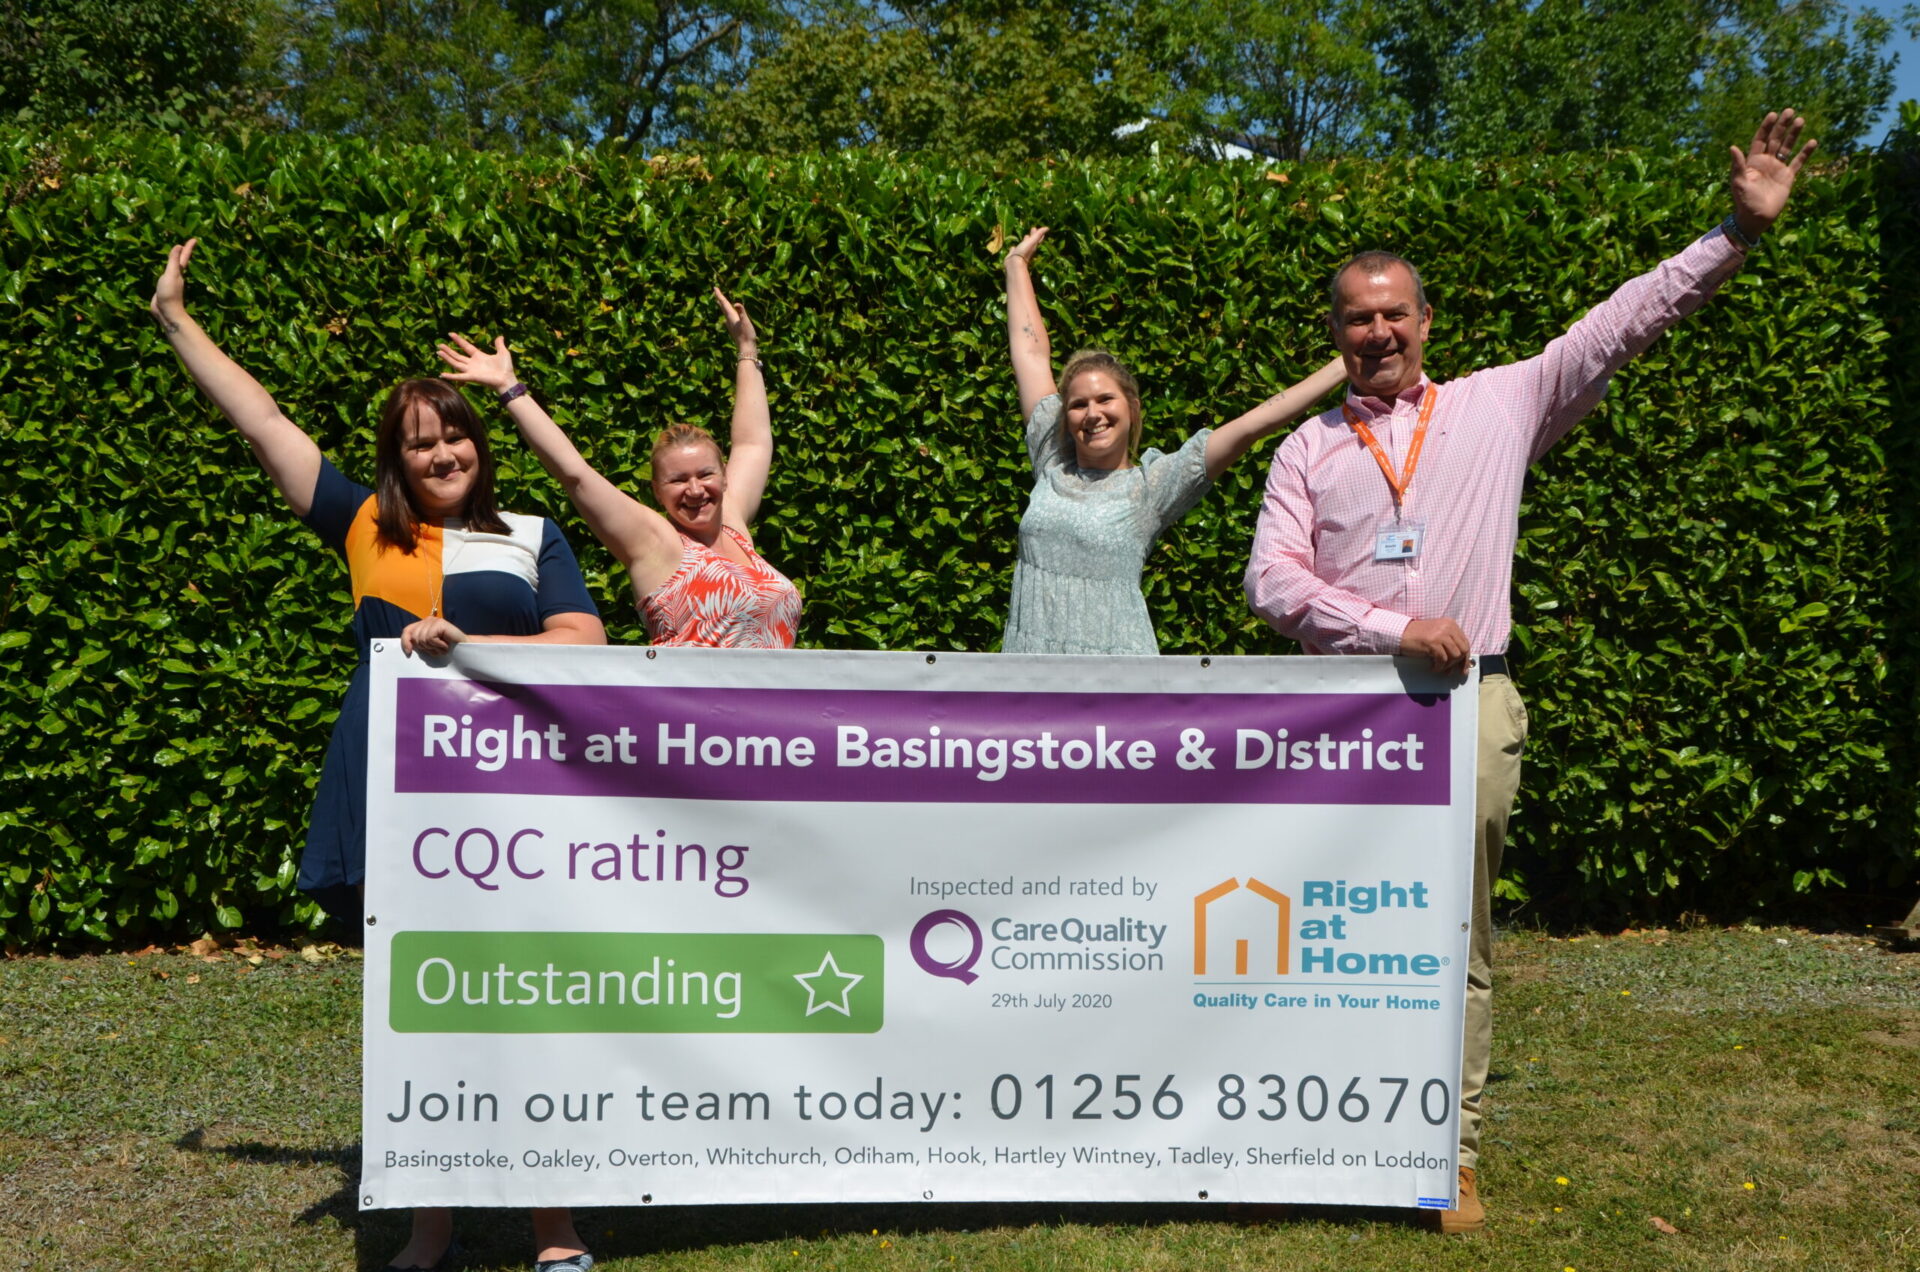 Right at Home continues its mission to become the UK’s most trusted homecare brand, with 25% of inspected offices now rated Outstanding